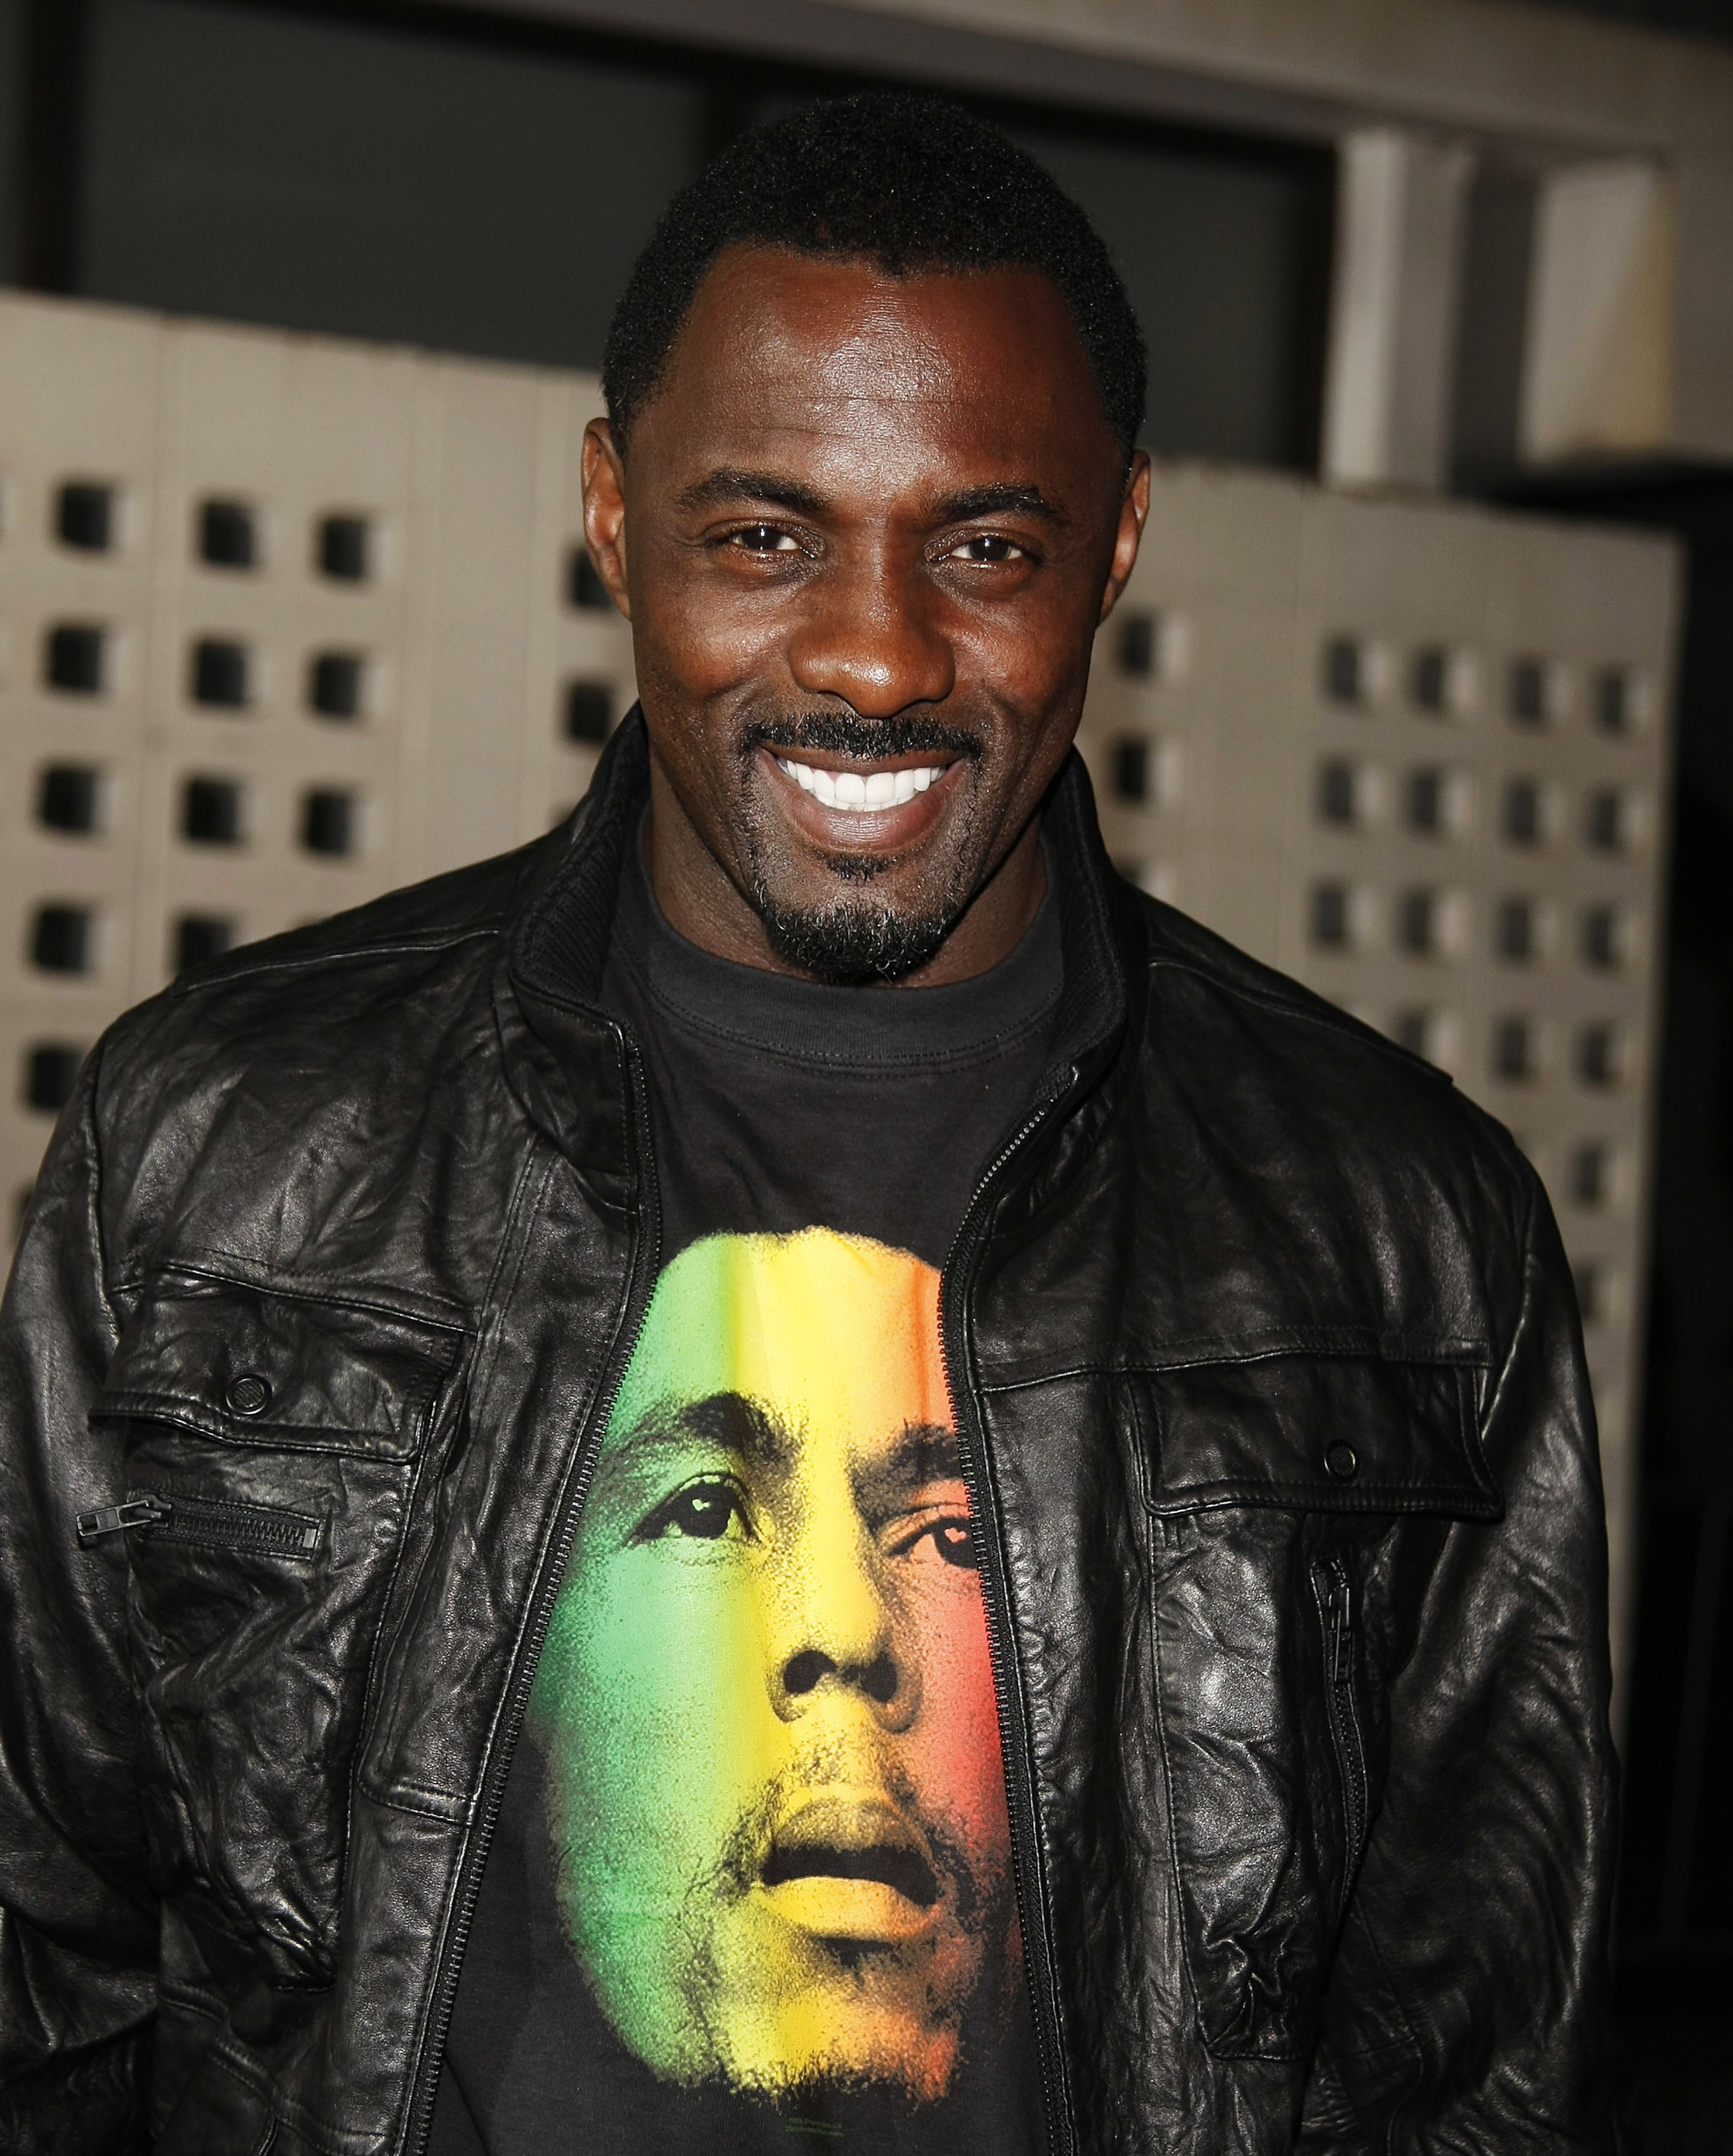 Idris smiling and wearing a leather jacket and Bob Marley T-shirt